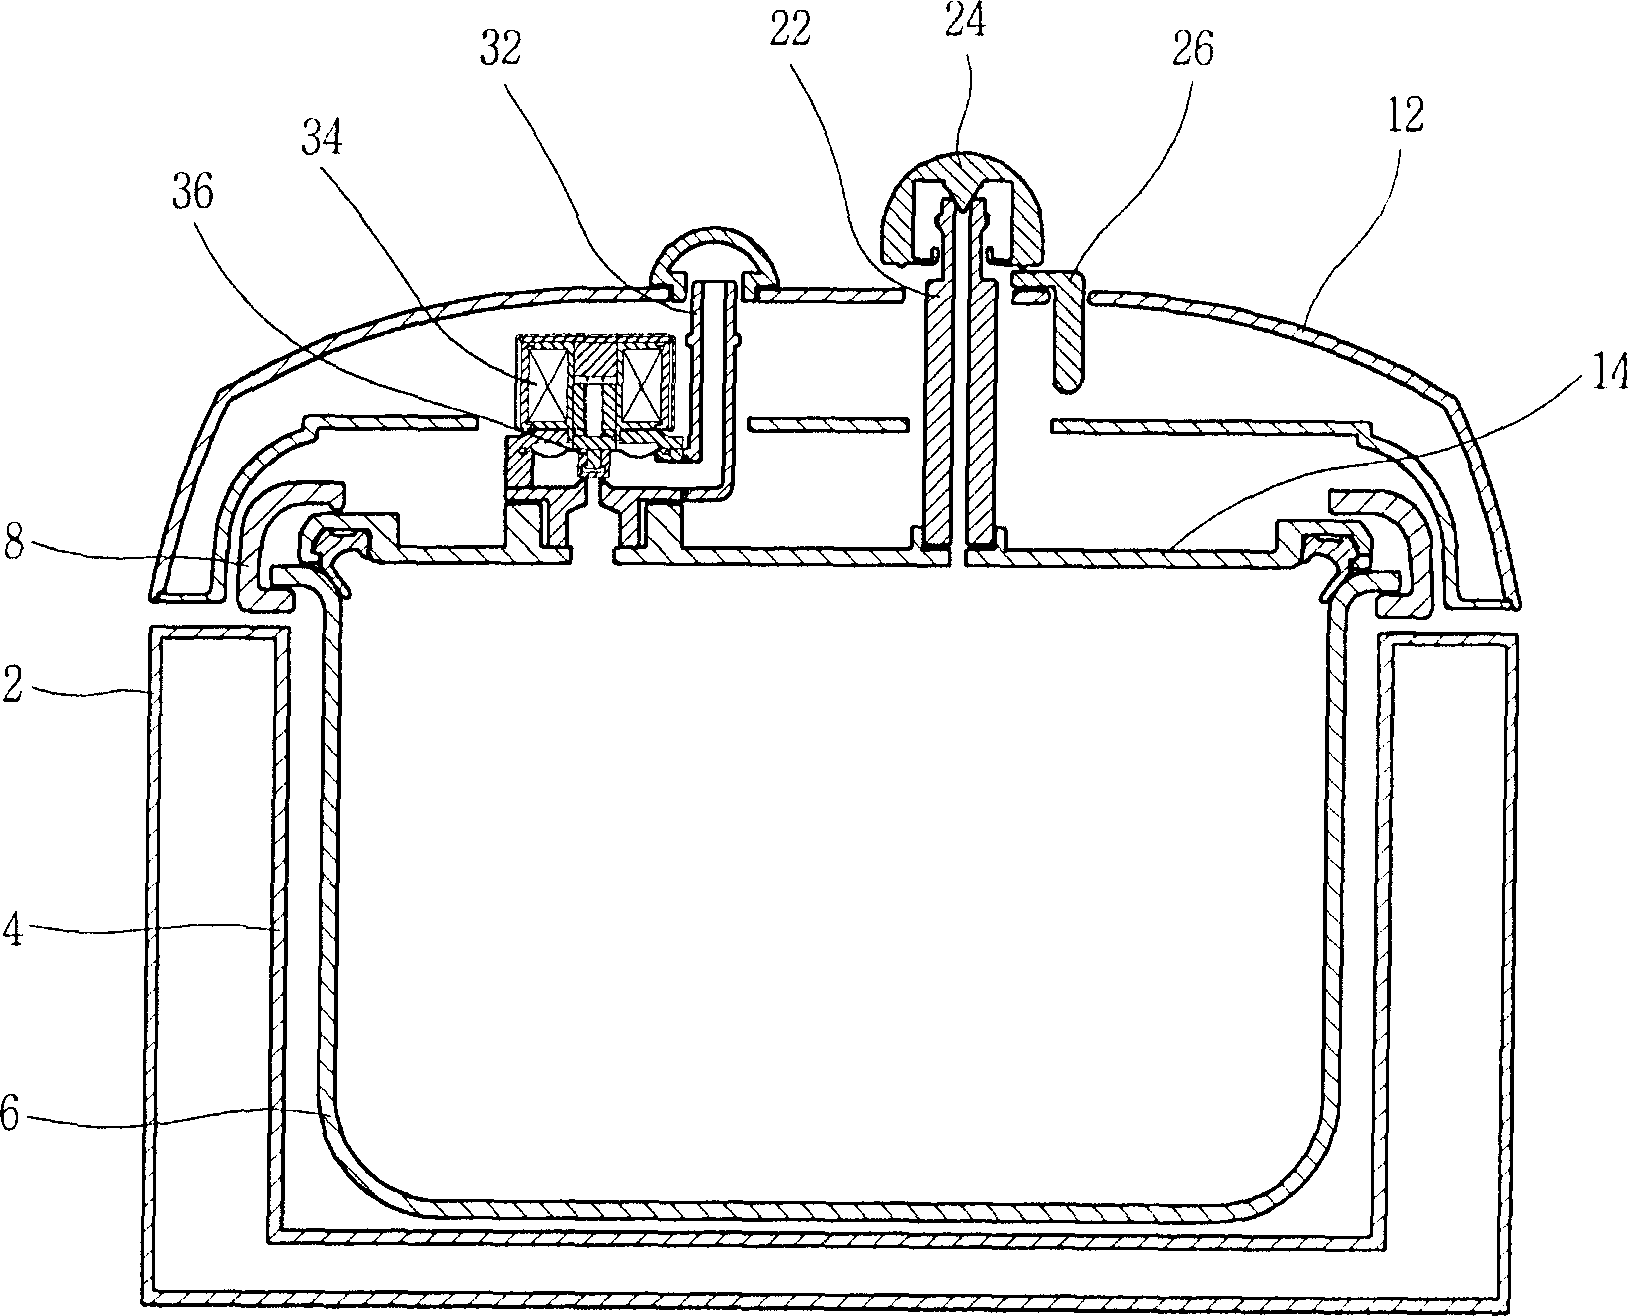 Steam discharging device for electric pressure cooker